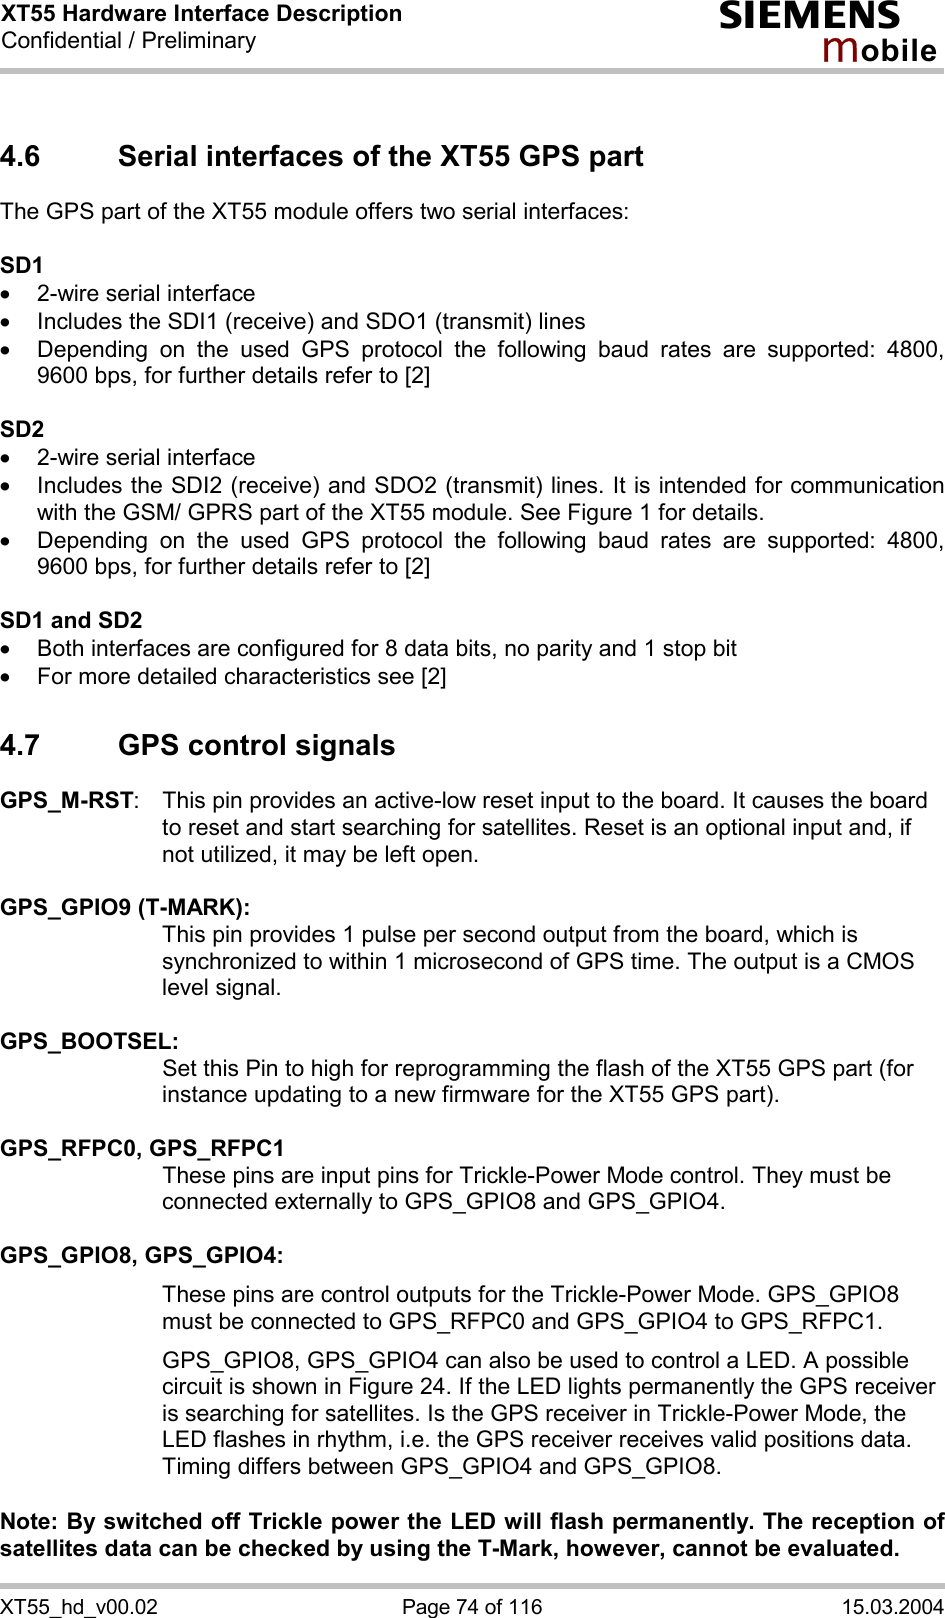 XT55 Hardware Interface Description Confidential / Preliminary s mo b i l e XT55_hd_v00.02  Page 74 of 116  15.03.2004 4.6  Serial interfaces of the XT55 GPS part The GPS part of the XT55 module offers two serial interfaces:  SD1 ·  2-wire serial interface ·  Includes the SDI1 (receive) and SDO1 (transmit) lines ·  Depending on the used GPS protocol the following baud rates are supported: 4800, 9600 bps, for further details refer to [2]  SD2 ·  2-wire serial interface ·  Includes the SDI2 (receive) and SDO2 (transmit) lines. It is intended for communication with the GSM/ GPRS part of the XT55 module. See Figure 1 for details. ·  Depending on the used GPS protocol the following baud rates are supported: 4800, 9600 bps, for further details refer to [2]  SD1 and SD2 ·  Both interfaces are configured for 8 data bits, no parity and 1 stop bit ·  For more detailed characteristics see [2] 4.7  GPS control signals GPS_M-RST:  This pin provides an active-low reset input to the board. It causes the board to reset and start searching for satellites. Reset is an optional input and, if not utilized, it may be left open.  GPS_GPIO9 (T-MARK):   This pin provides 1 pulse per second output from the board, which is synchronized to within 1 microsecond of GPS time. The output is a CMOS level signal.   GPS_BOOTSEL:   Set this Pin to high for reprogramming the flash of the XT55 GPS part (for instance updating to a new firmware for the XT55 GPS part).  GPS_RFPC0, GPS_RFPC1   These pins are input pins for Trickle-Power Mode control. They must be connected externally to GPS_GPIO8 and GPS_GPIO4.  GPS_GPIO8, GPS_GPIO4: These pins are control outputs for the Trickle-Power Mode. GPS_GPIO8 must be connected to GPS_RFPC0 and GPS_GPIO4 to GPS_RFPC1.  GPS_GPIO8, GPS_GPIO4 can also be used to control a LED. A possible circuit is shown in Figure 24. If the LED lights permanently the GPS receiver is searching for satellites. Is the GPS receiver in Trickle-Power Mode, the LED flashes in rhythm, i.e. the GPS receiver receives valid positions data. Timing differs between GPS_GPIO4 and GPS_GPIO8.  Note: By switched off Trickle power the LED will flash permanently. The reception of satellites data can be checked by using the T-Mark, however, cannot be evaluated. 